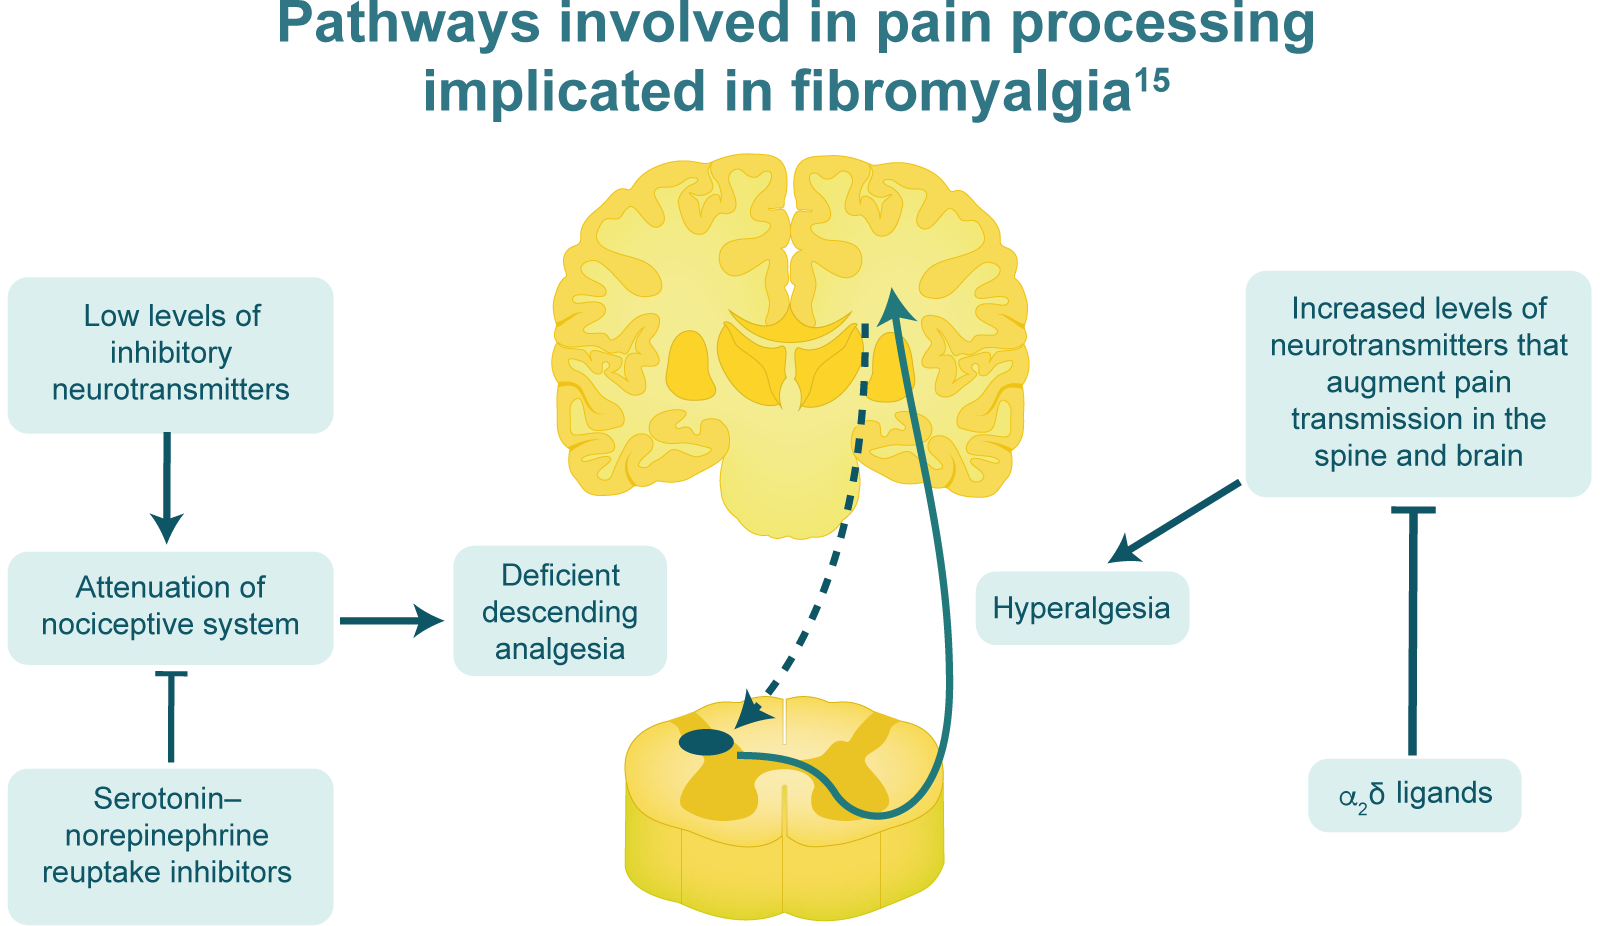 Pathways involved in pain processing implicated in fibromyalgia